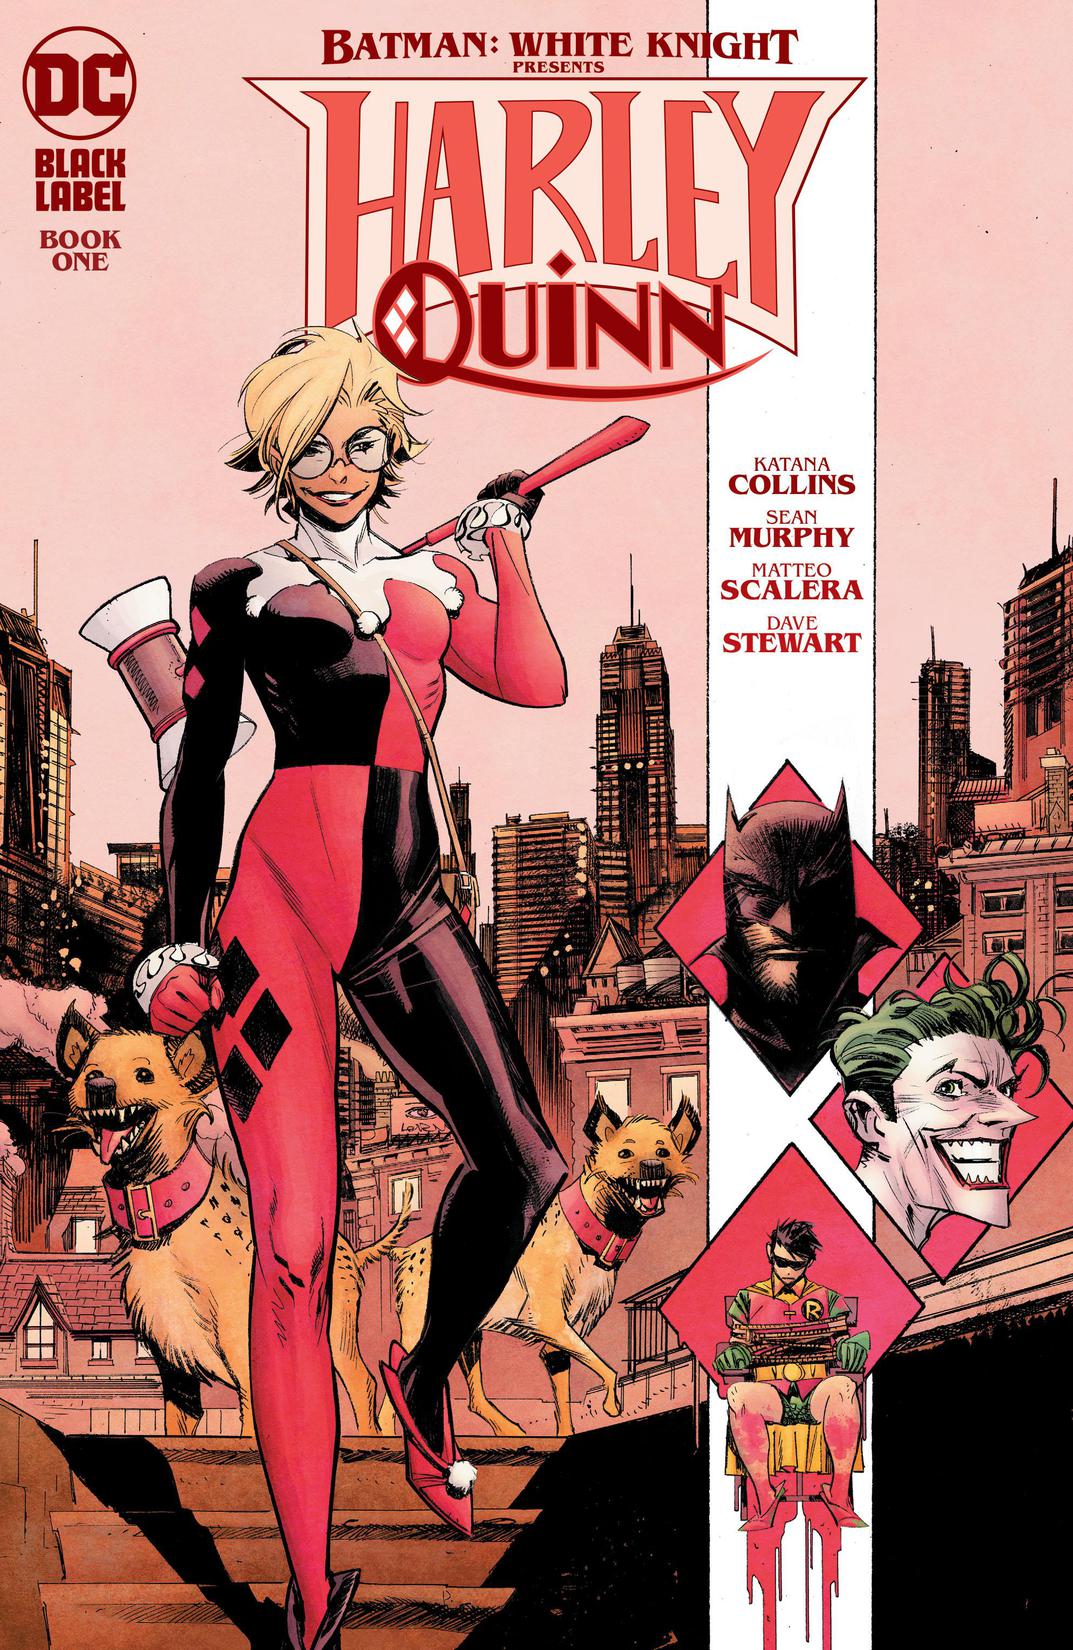 Batman: White Knight Presents: Harley Quinn #1 preview images